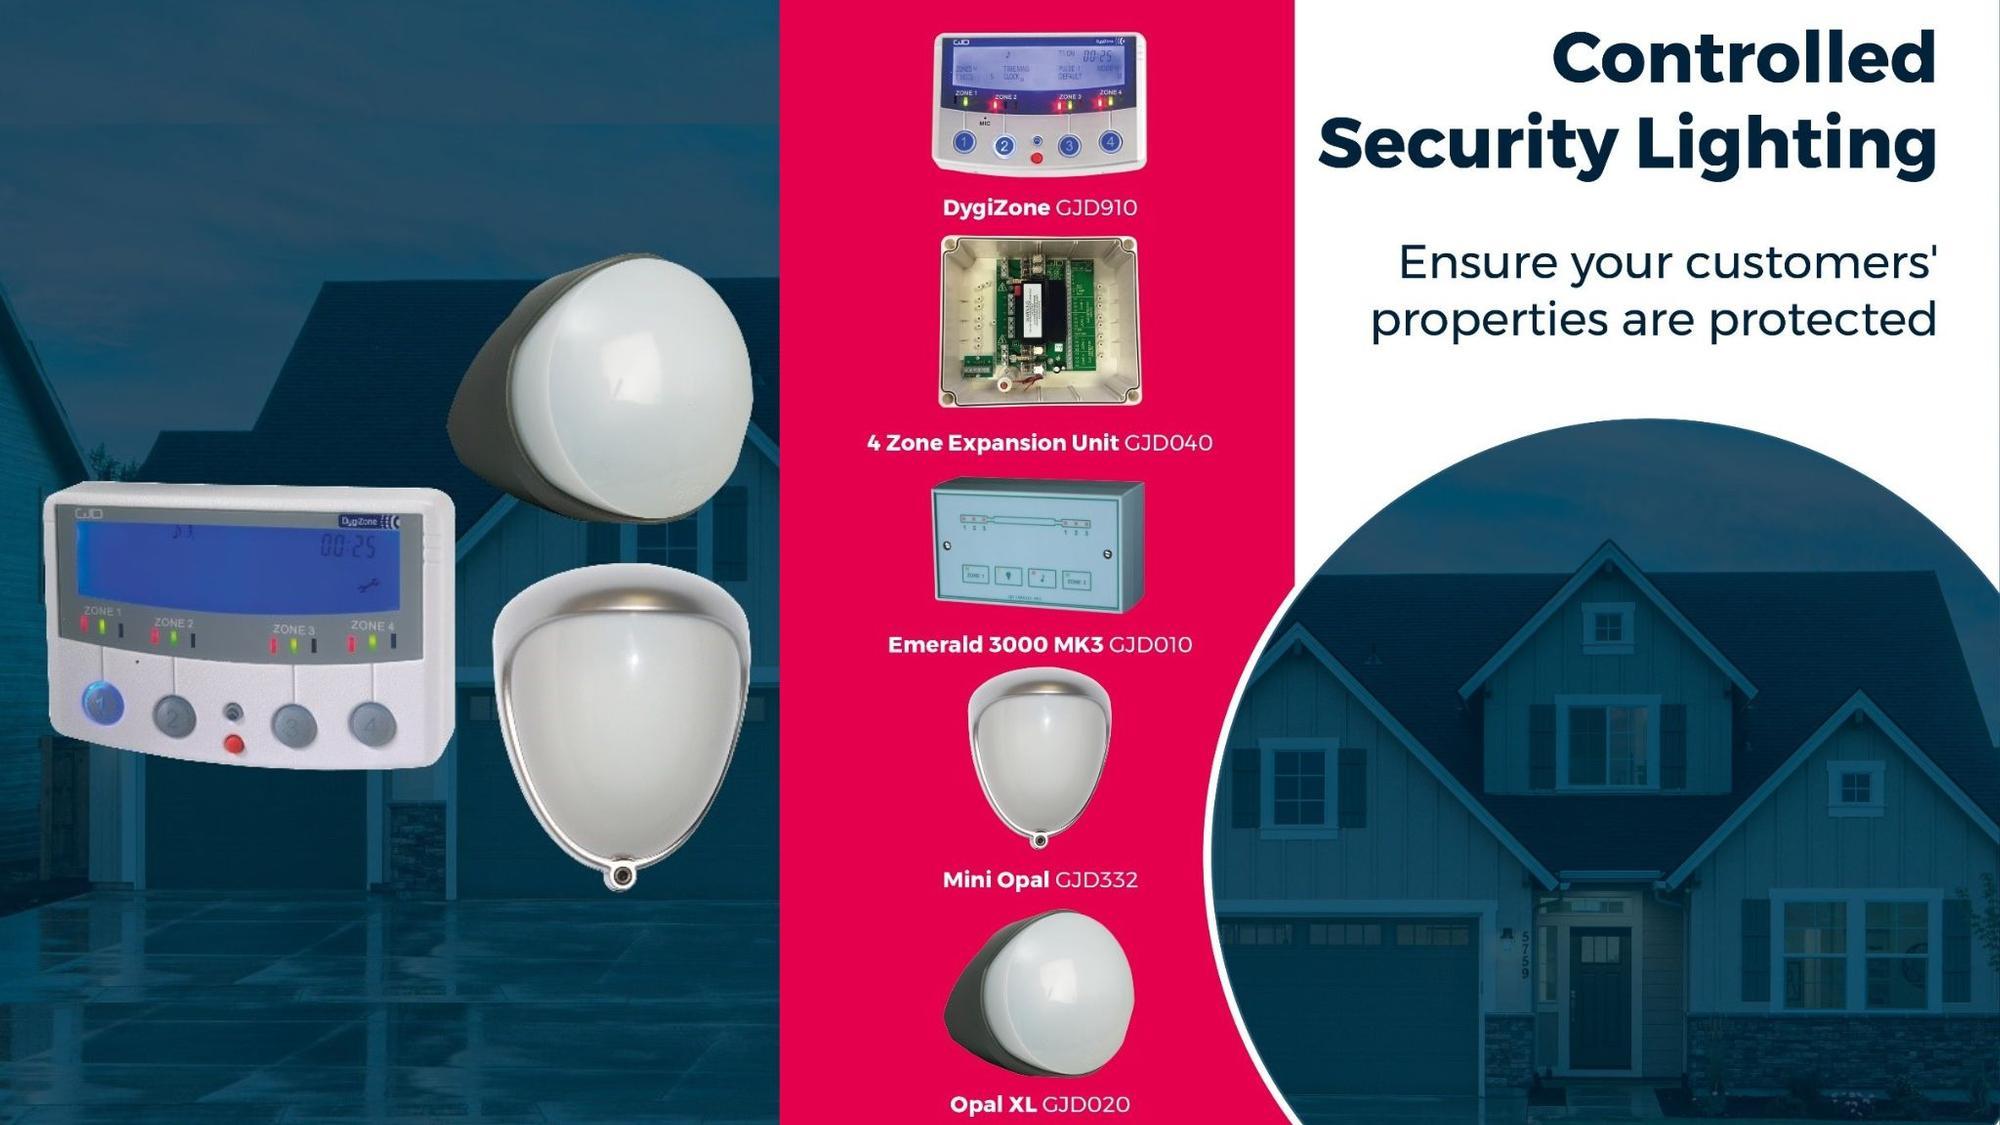 Why now is the perfect time to upgrade your customers’ outdoor controlled security lighting